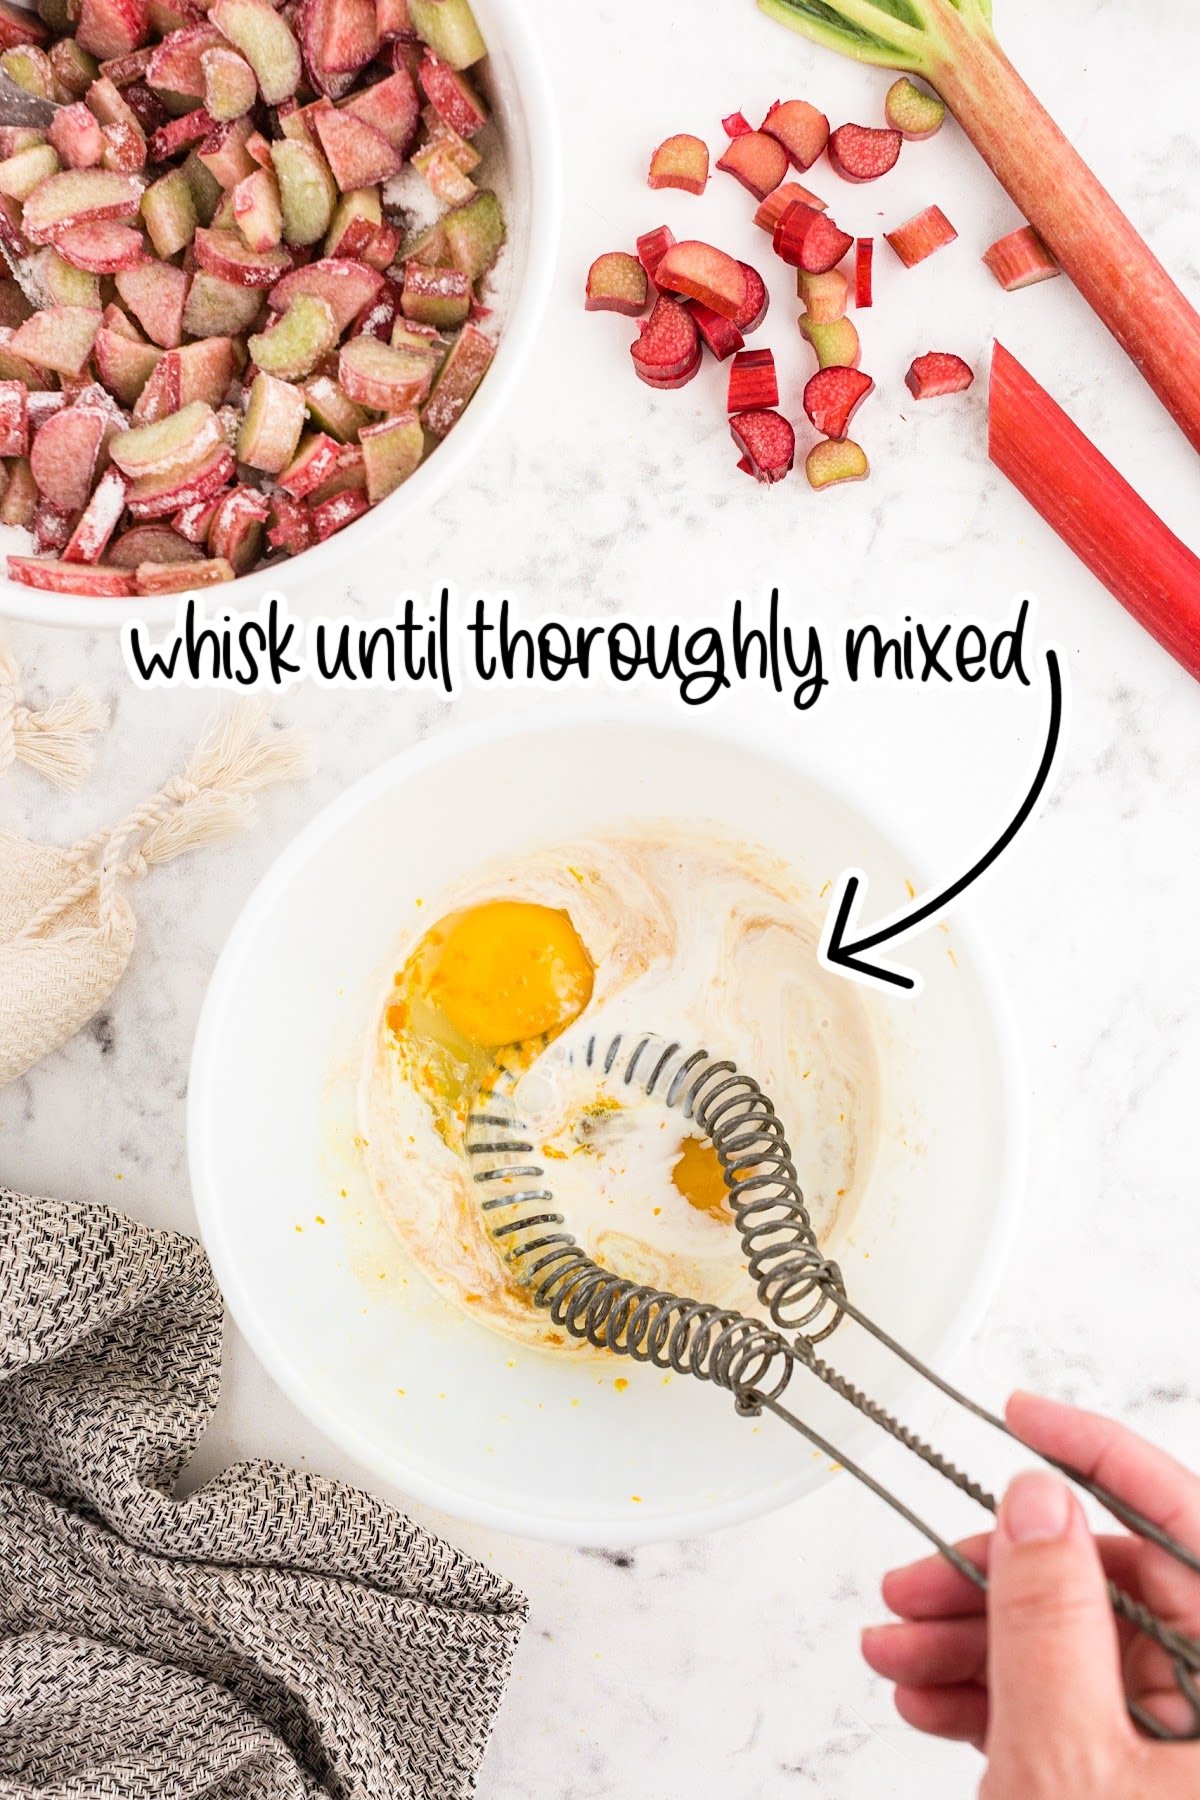 Beating egg and milk in a mixing bowl, flour/rhubarb mixture in a nearby bowl. Text overlay reads "whisk until thoroughly mixed."